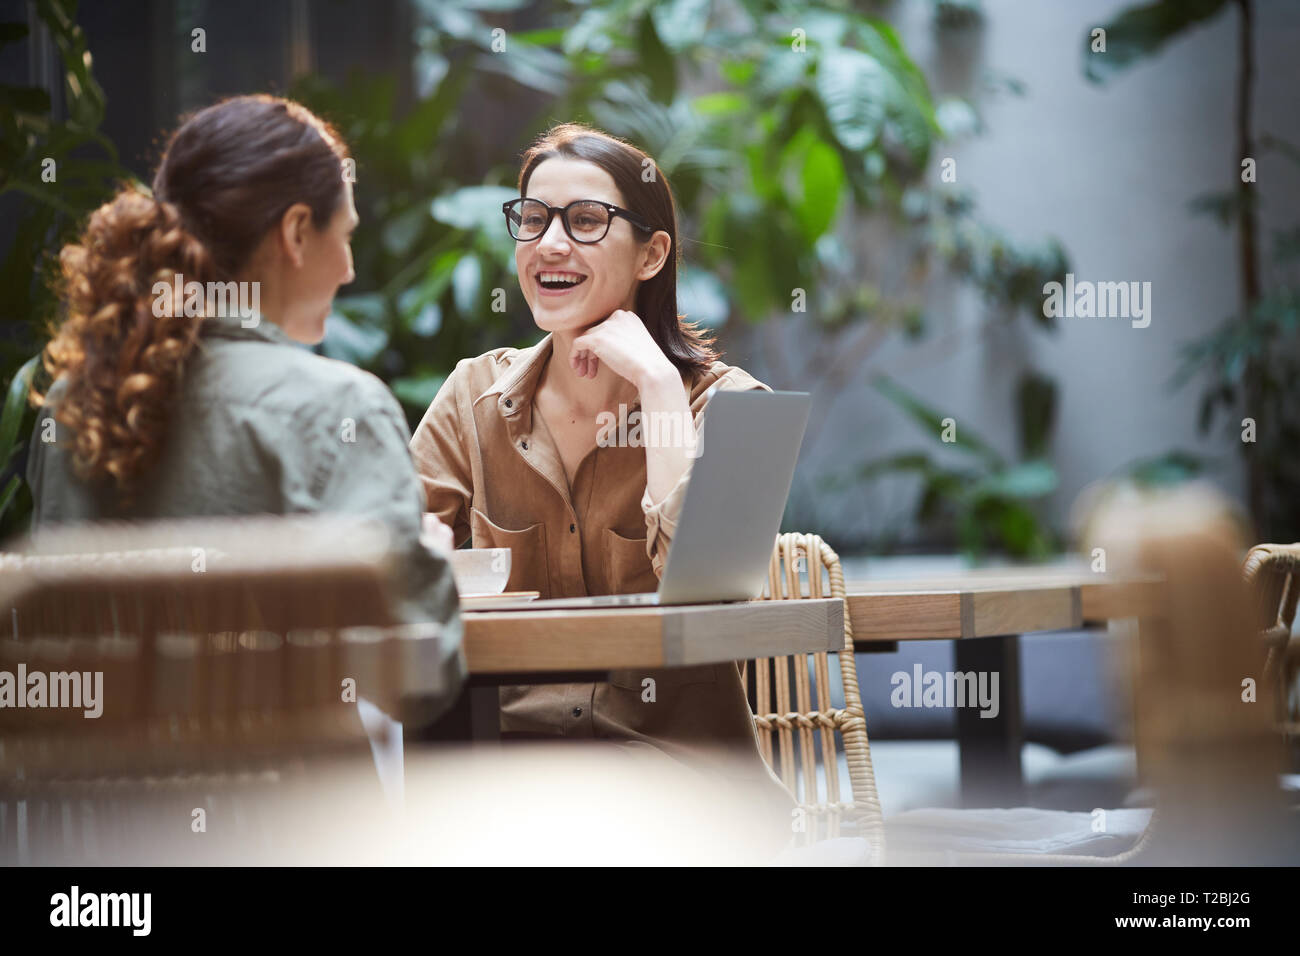 Woman laughing during lunch with colleague Stock Photo - Alamy